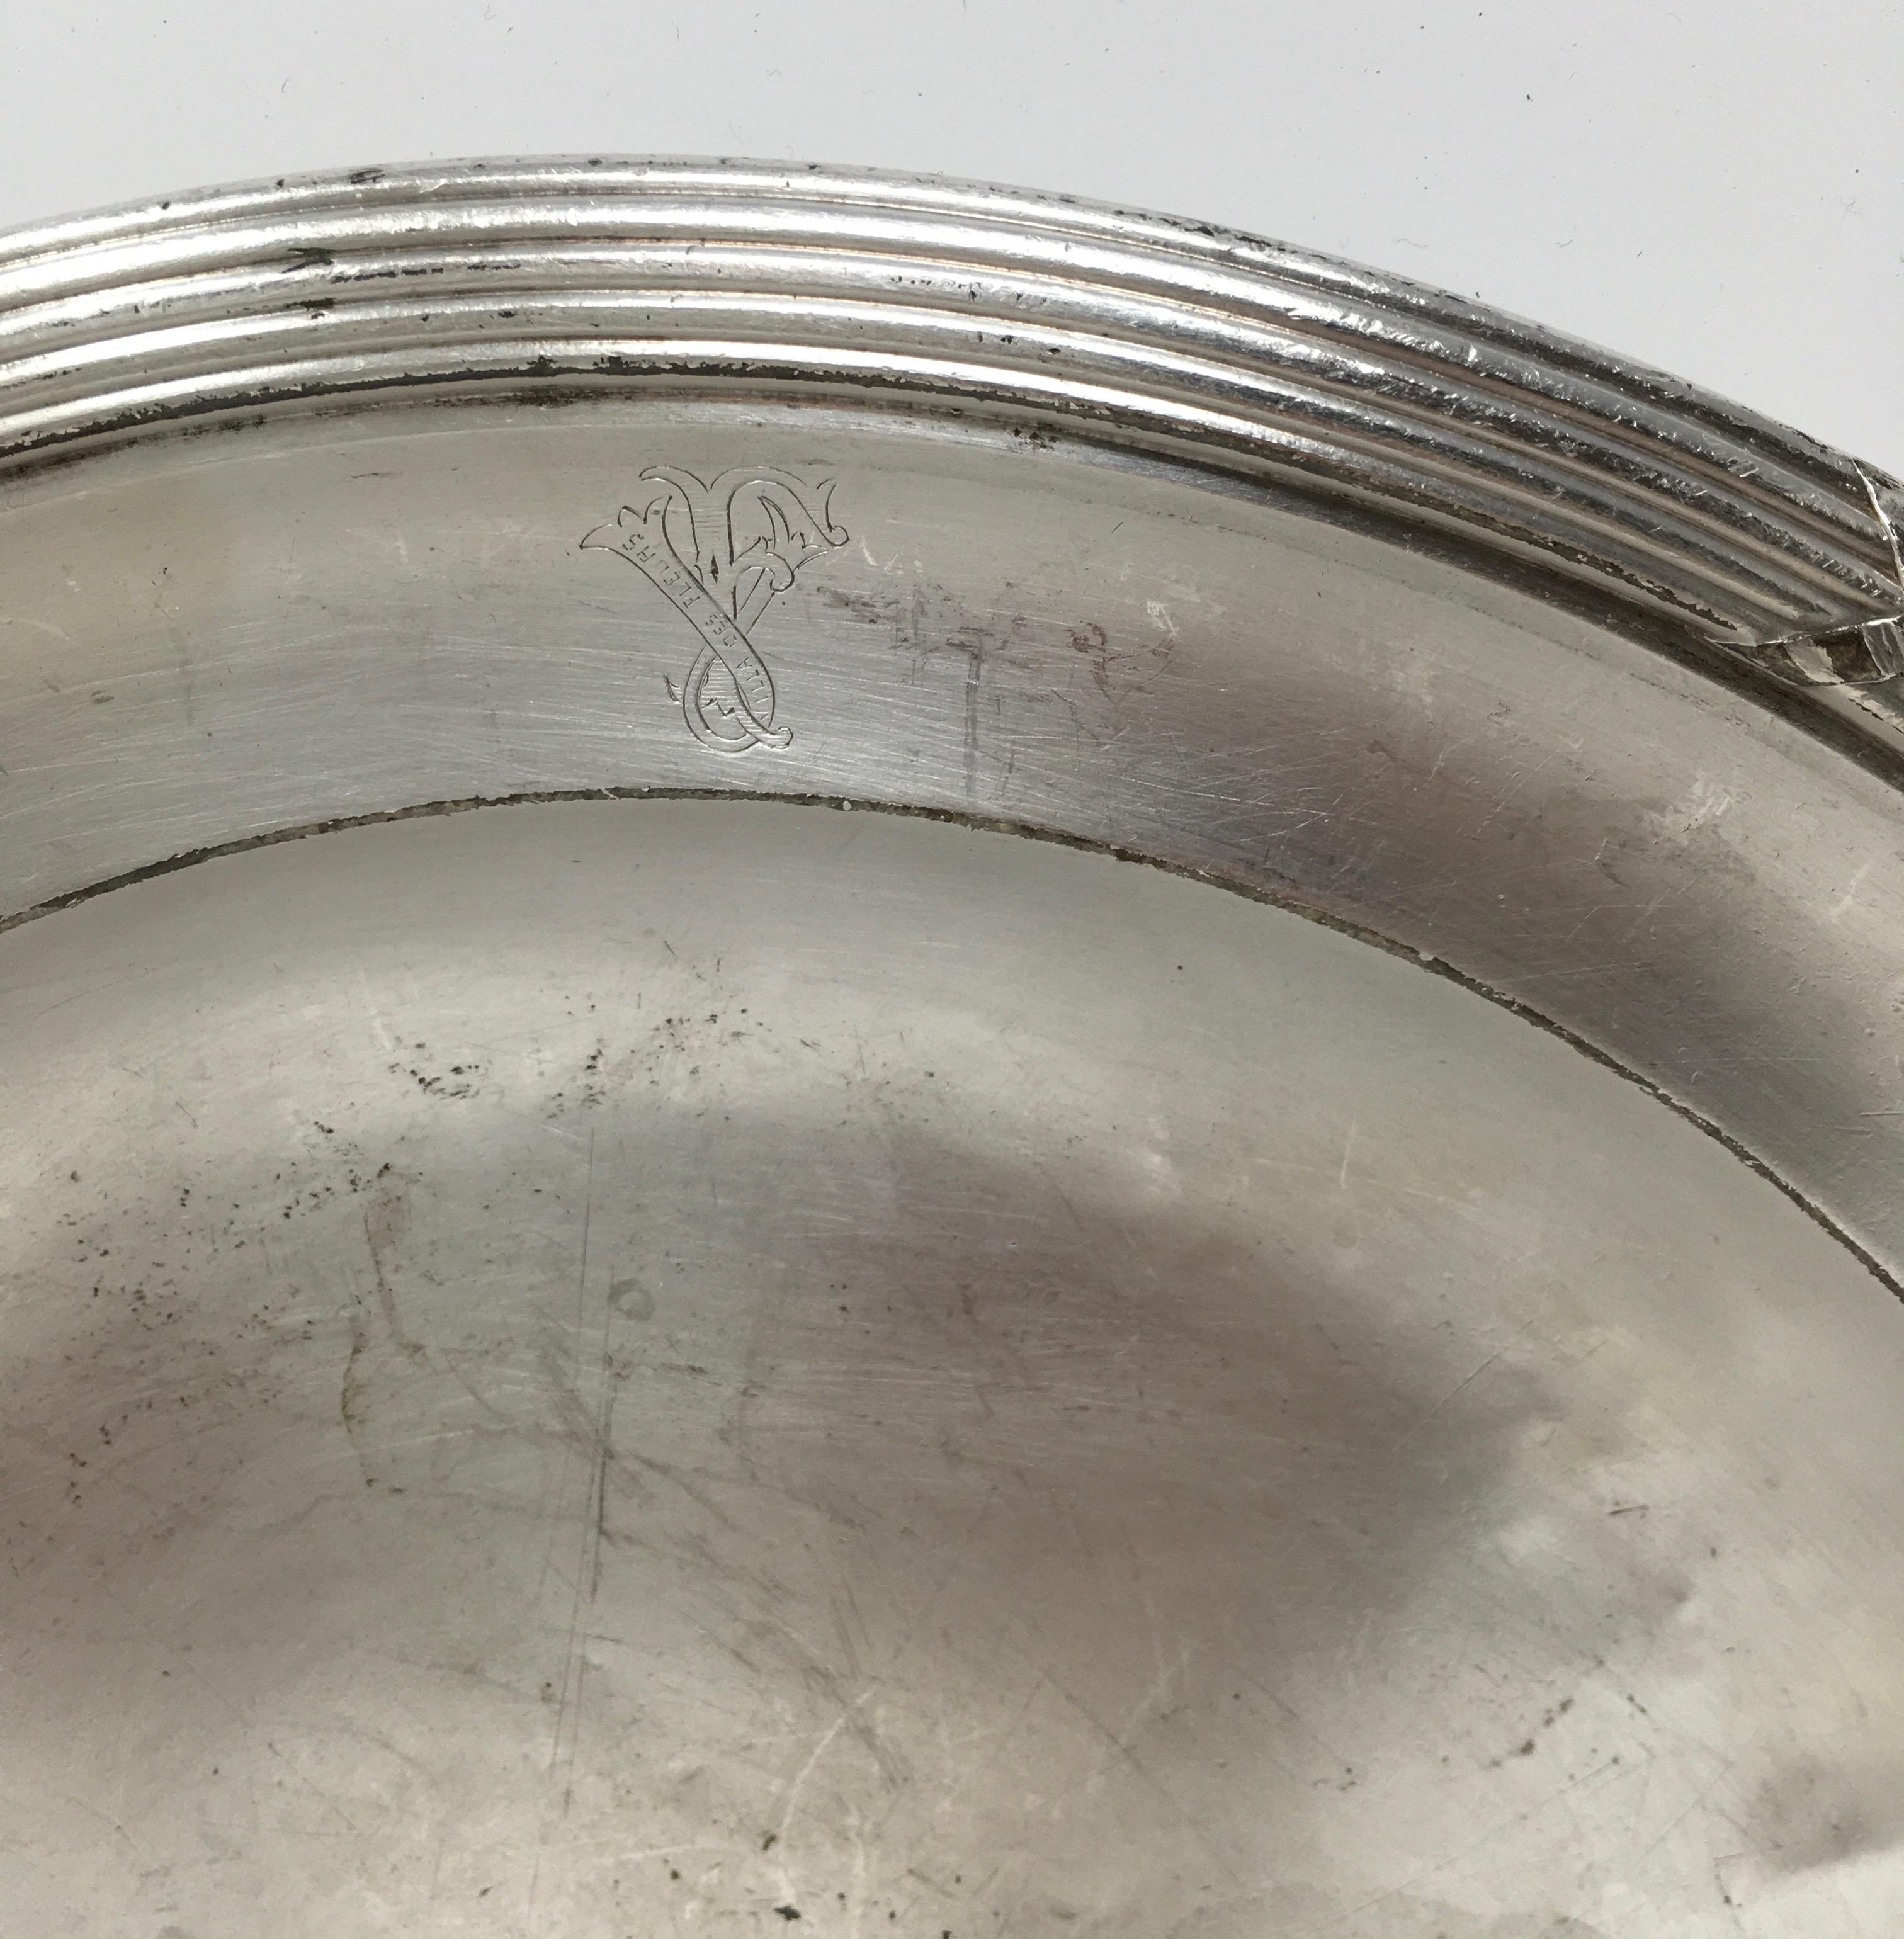 Found in France, this vintage hotel silver serving platter engraved with the Villa de Fleurs logo has a great aged patina. It would be beautiful in a cabinet and a great addition to your table or buffet.